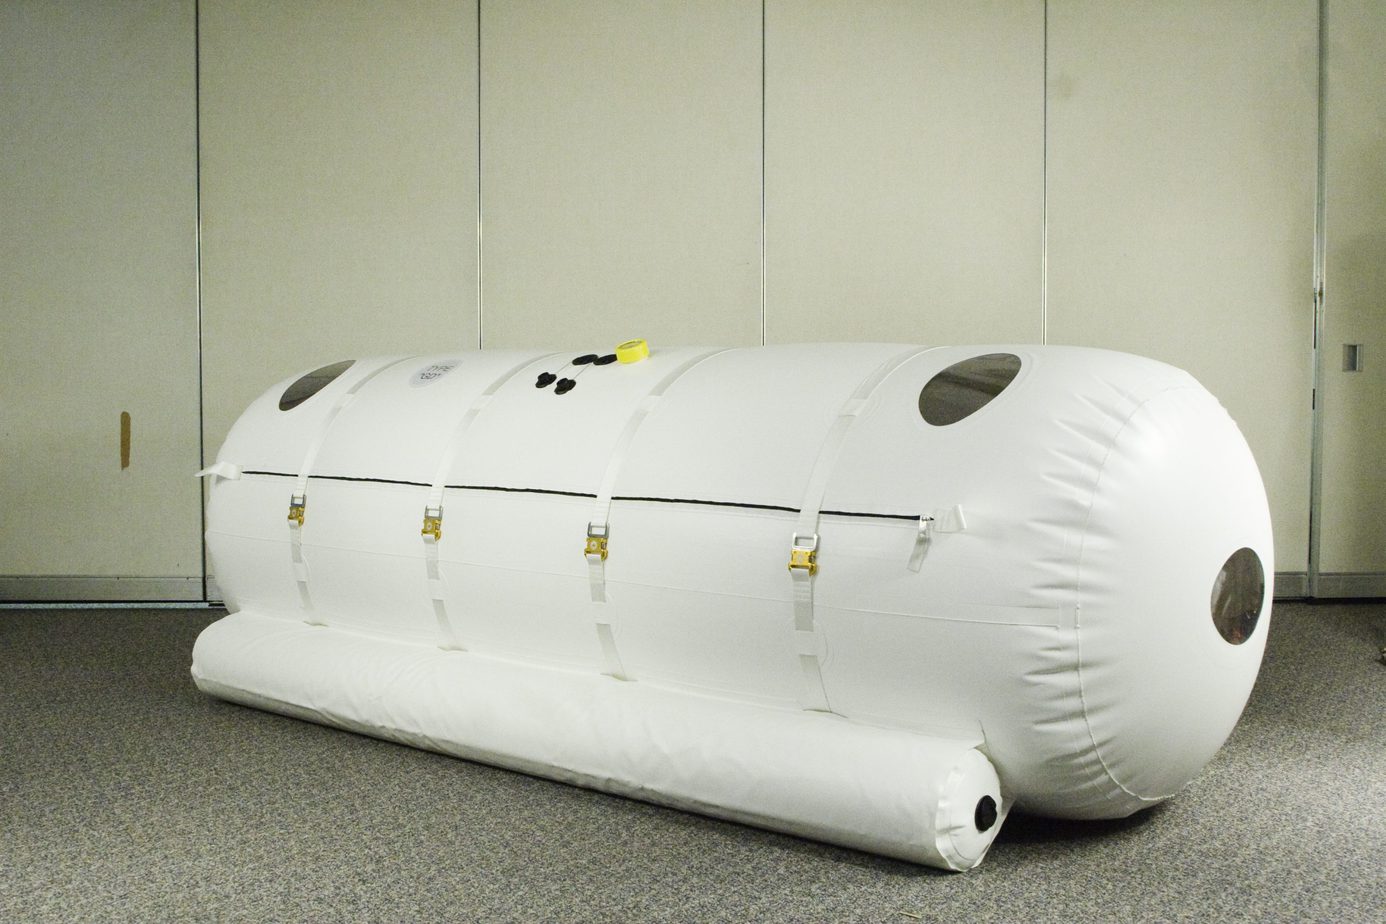 Why is hyperbaric oxygen therapy called a legal doping?